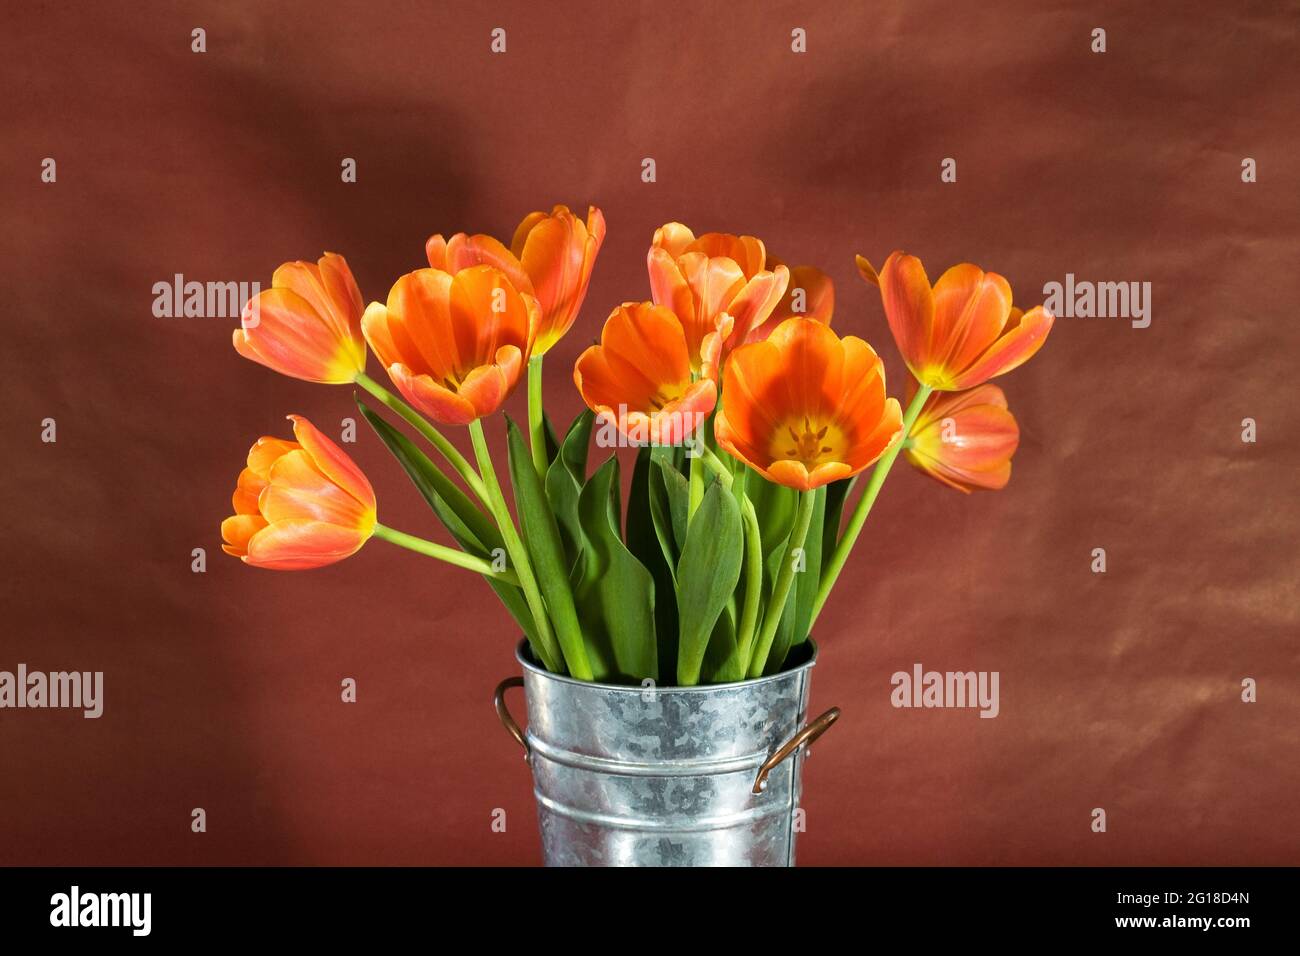 Portrait of pink and orange domestic tulips in a vase.  Tulips are a spring-blooming perennial herbaceous bulbiferous geophyte. Stock Photo